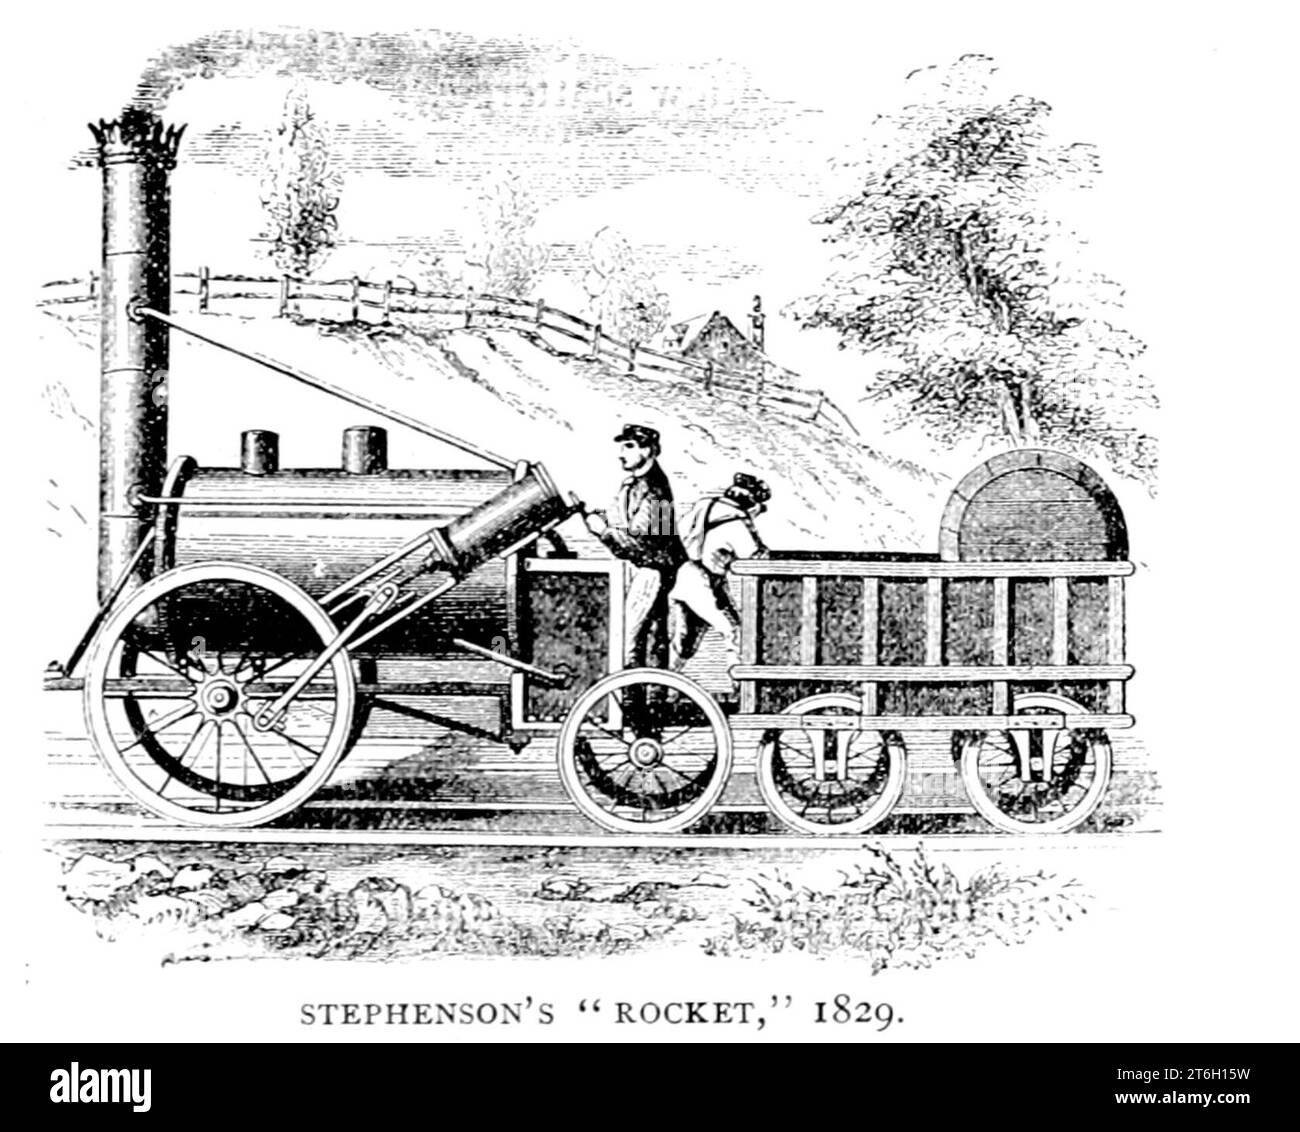 STEPHENSON'S ROCKET, 1829.Rocket was designed and built by Robert Stephenson in 1829, from the Article PIONEER LOCOMOTIVES IN ENGLAND AND AMERICA. By Alfred Mathews. from The Engineering Magazine DEVOTED TO INDUSTRIAL PROGRESS Volume XII October 1896 to March 1897 The Engineering Magazine Co Stock Photo